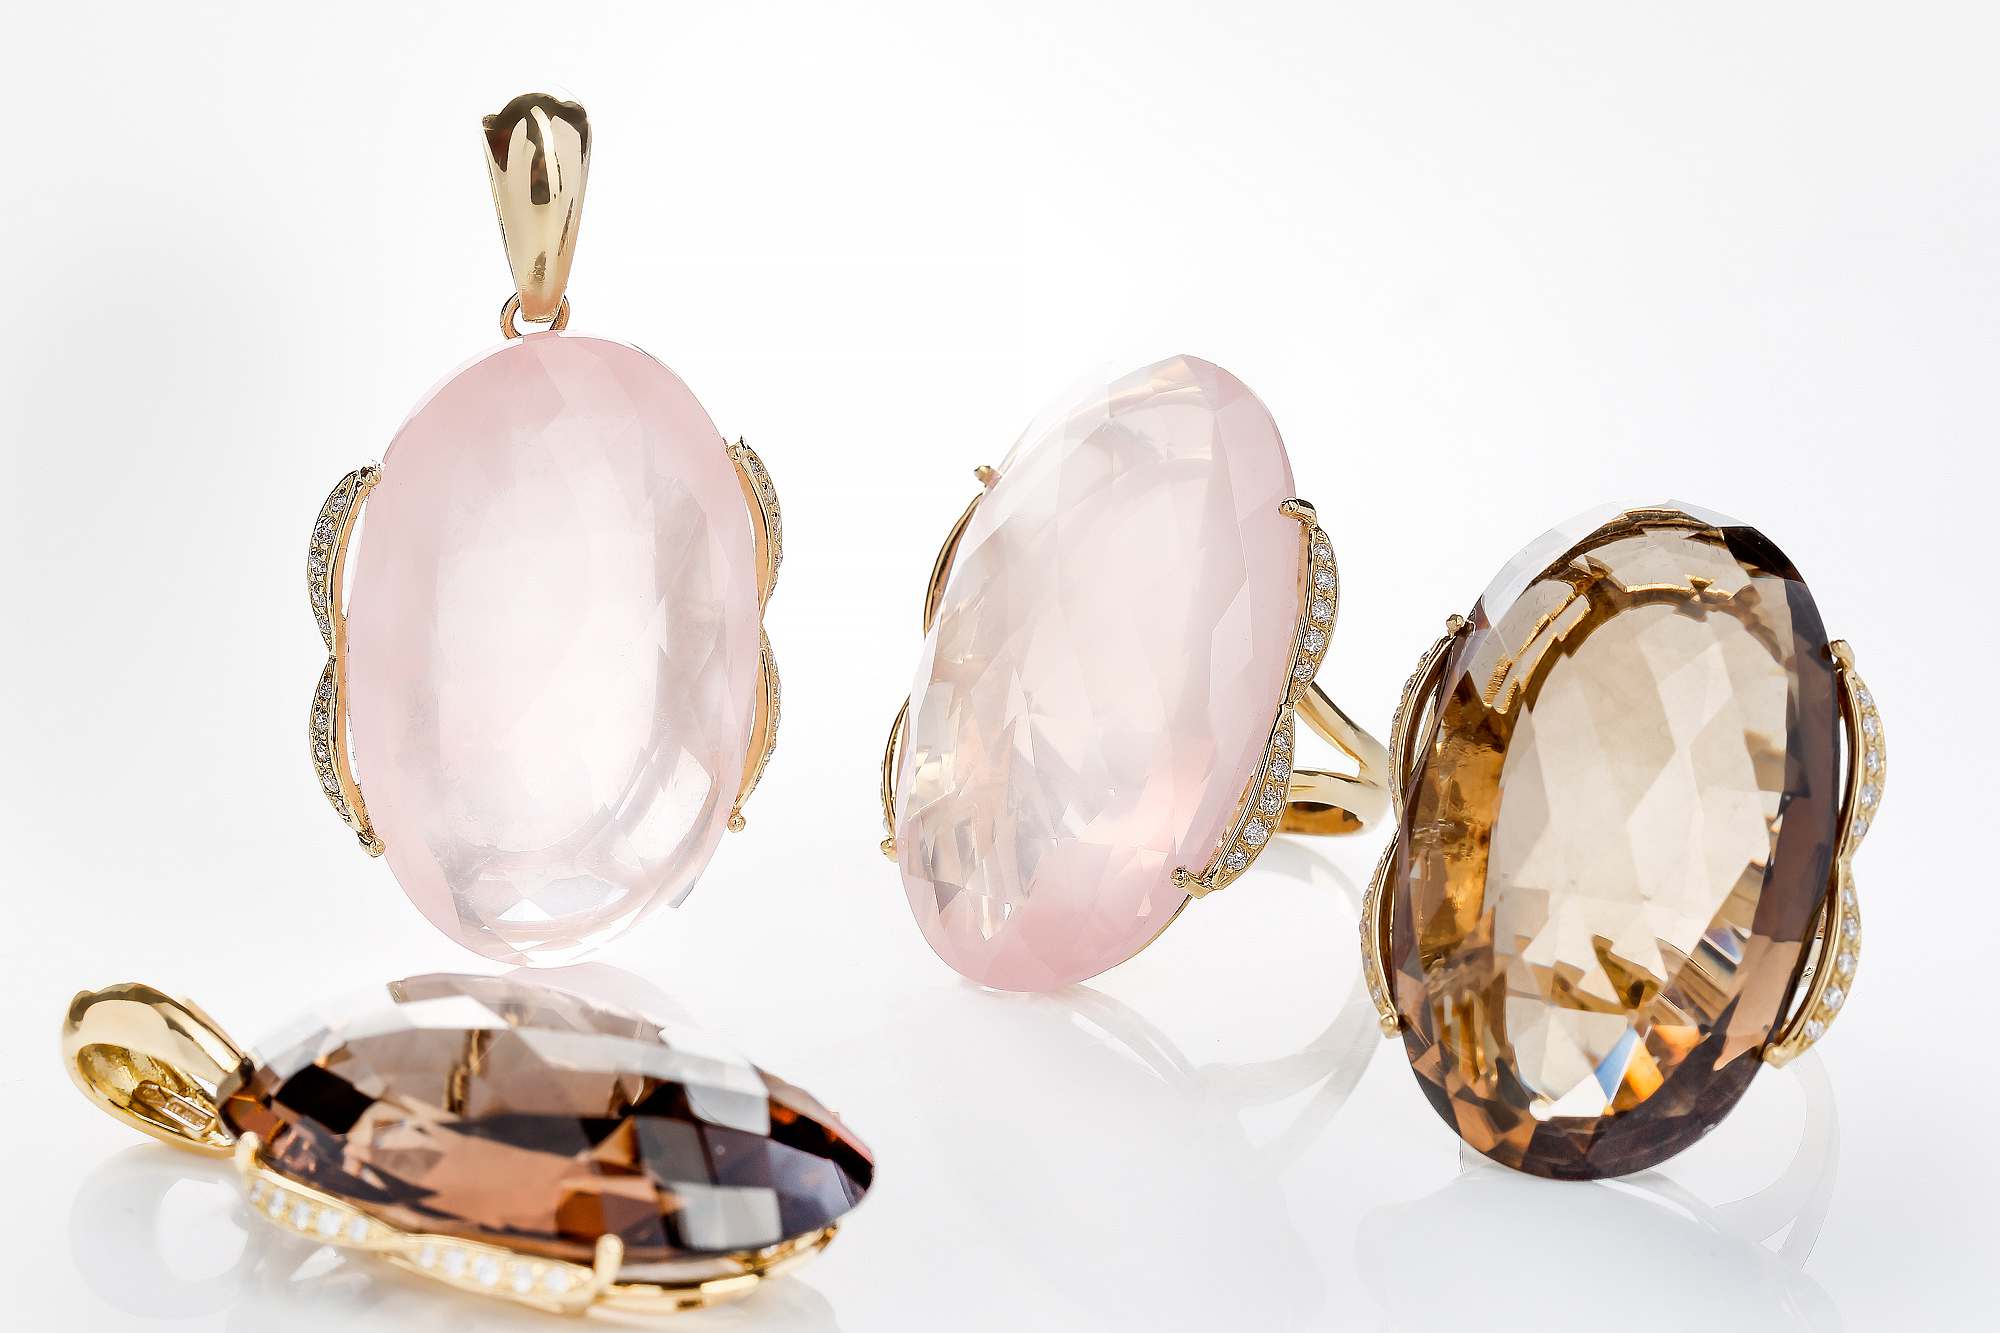 Parrini Gioielli - Rings and pendants with stones in gold